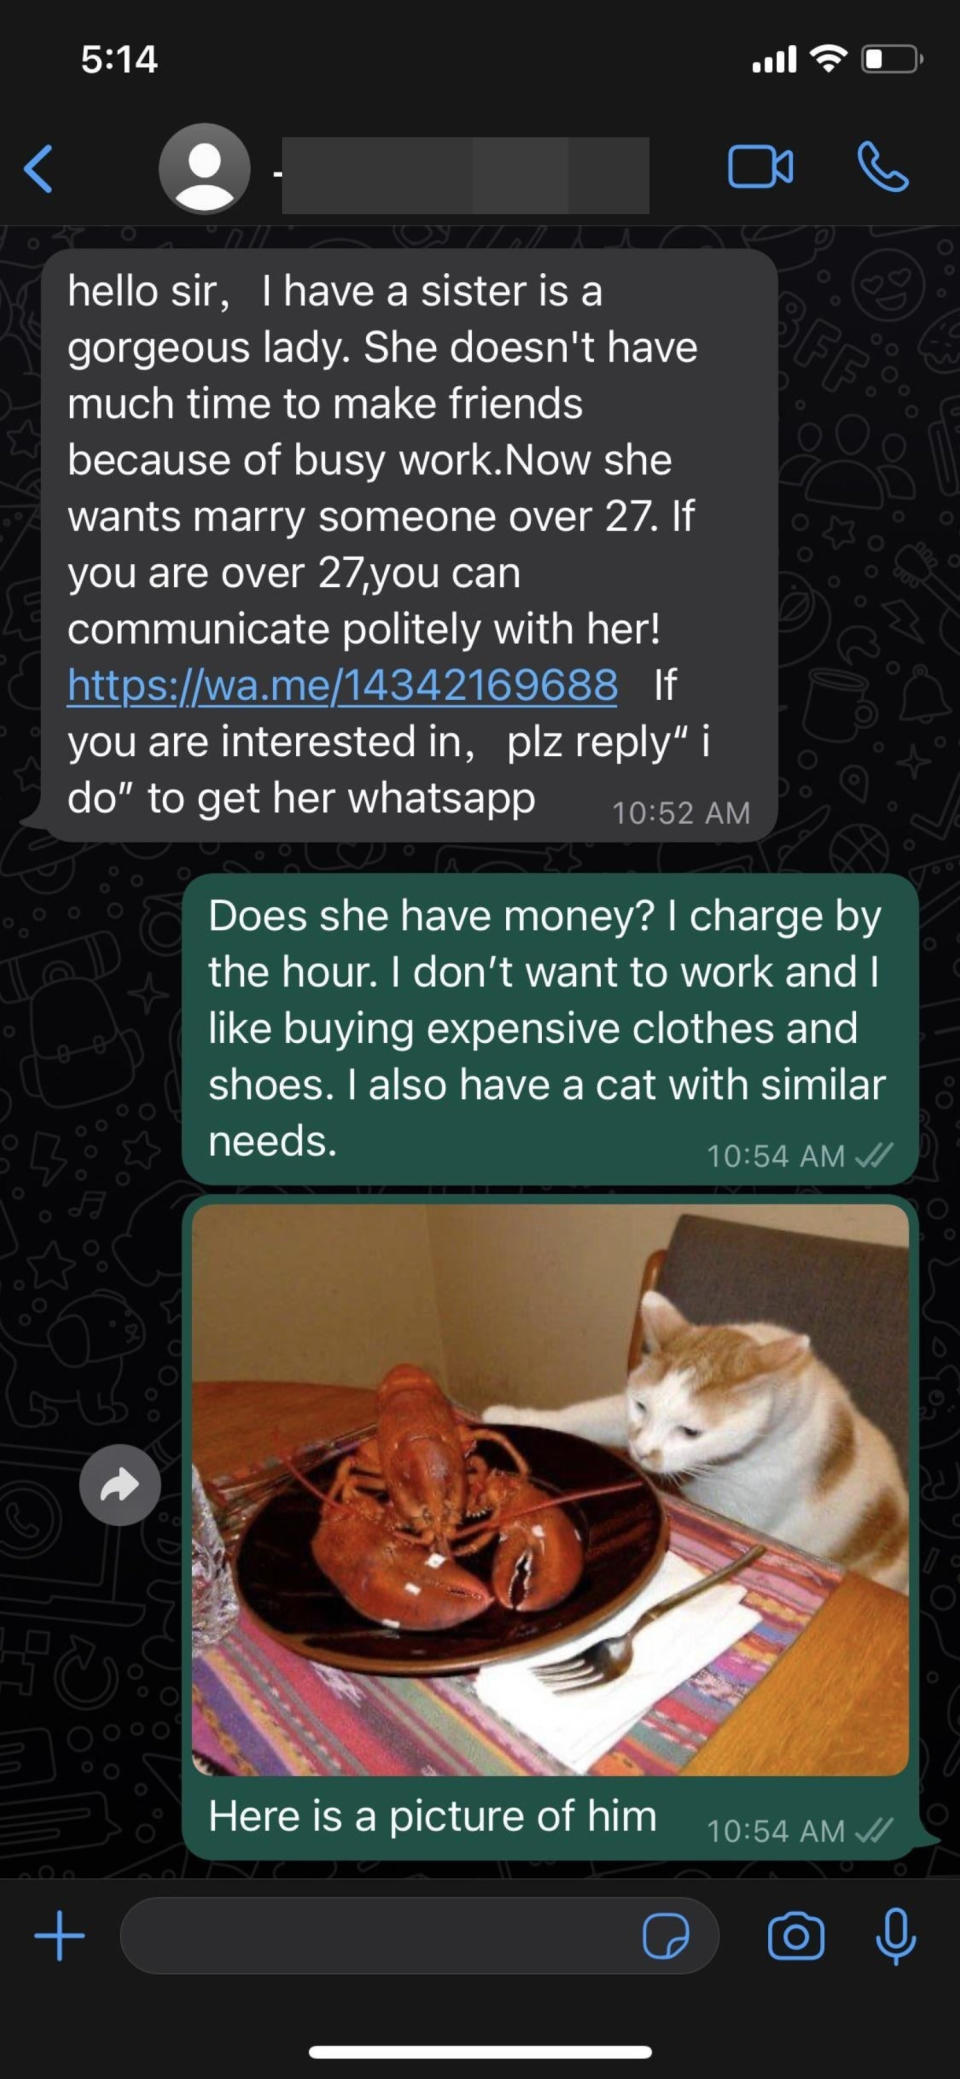 person who sends a scammer a funny piicture of a cat